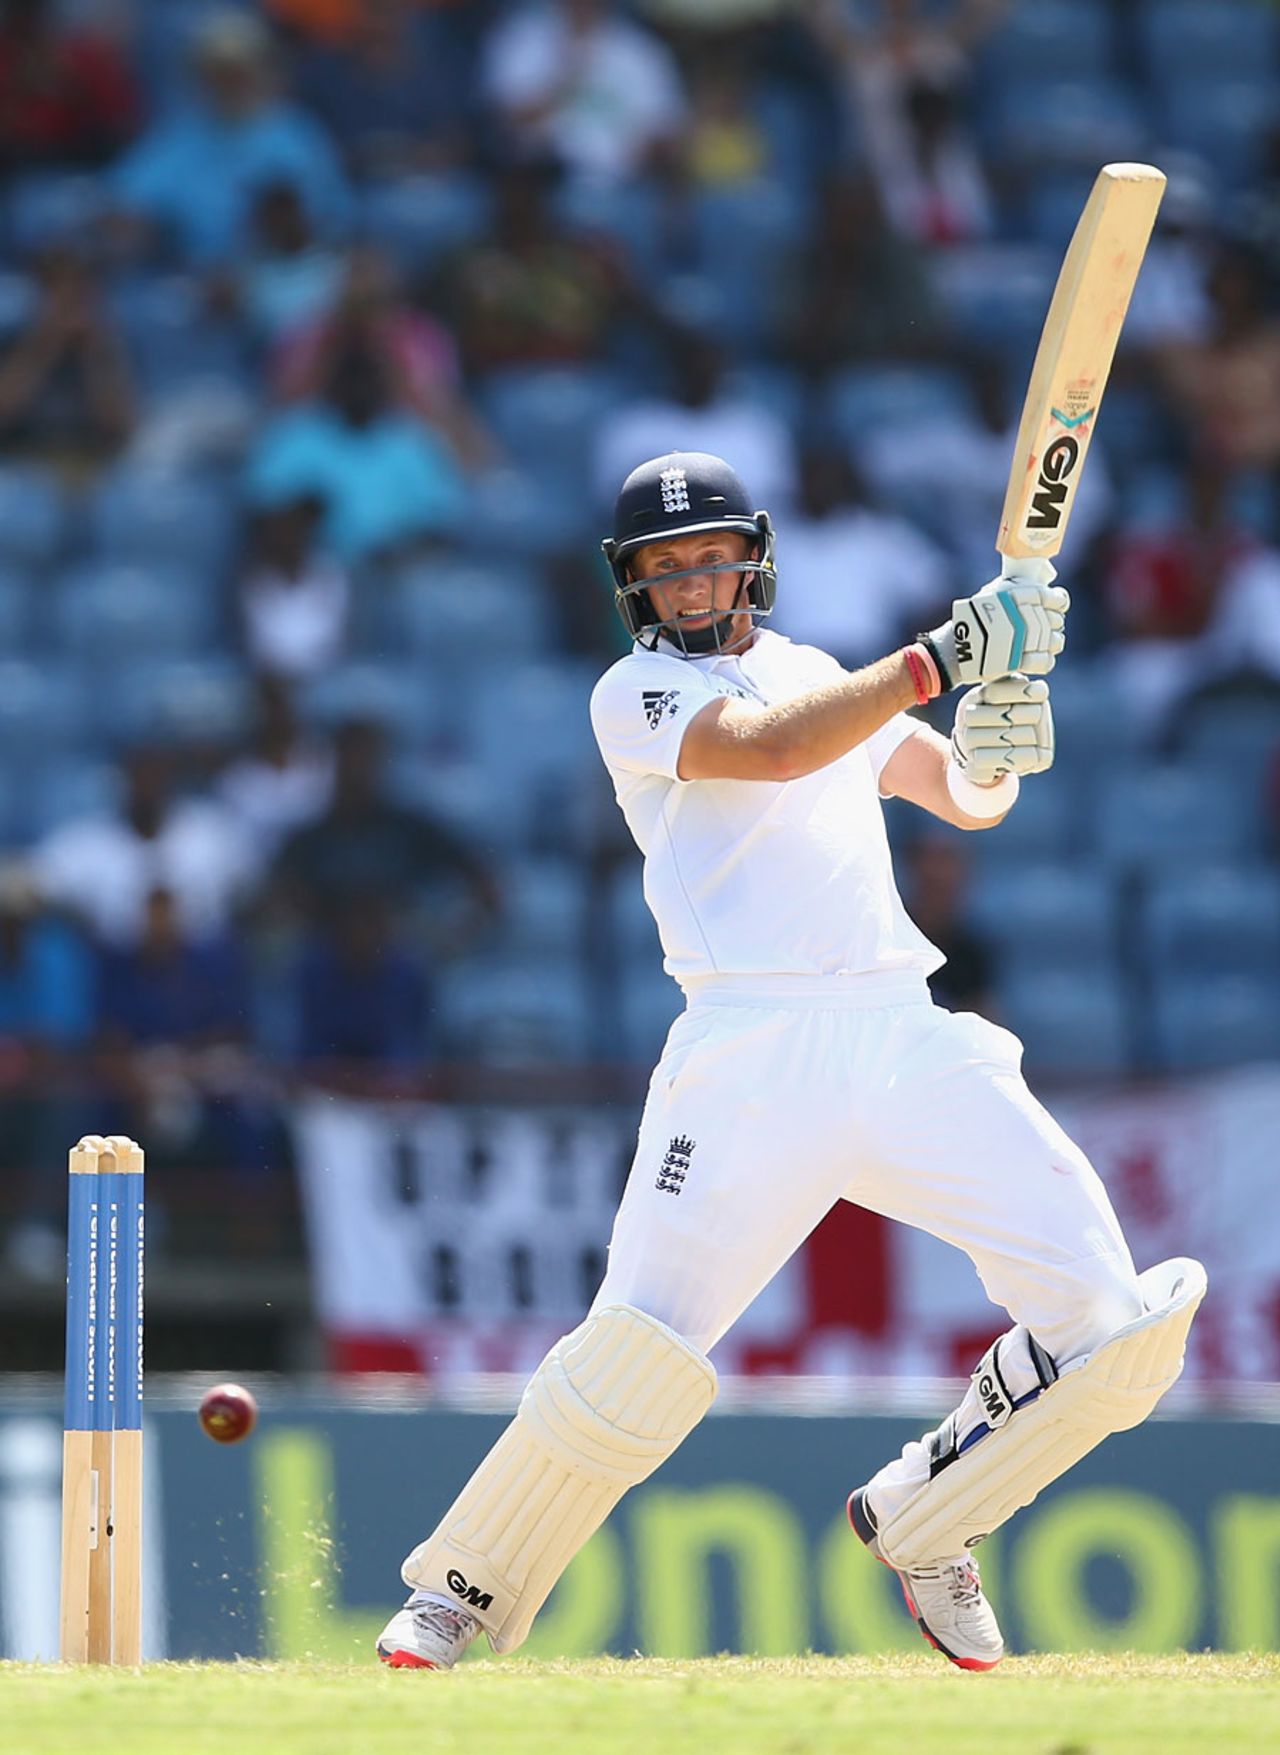 Joe Root moved another positive half century, West Indies v England, 2nd Test, St George's, 3rd day, April 23, 2015